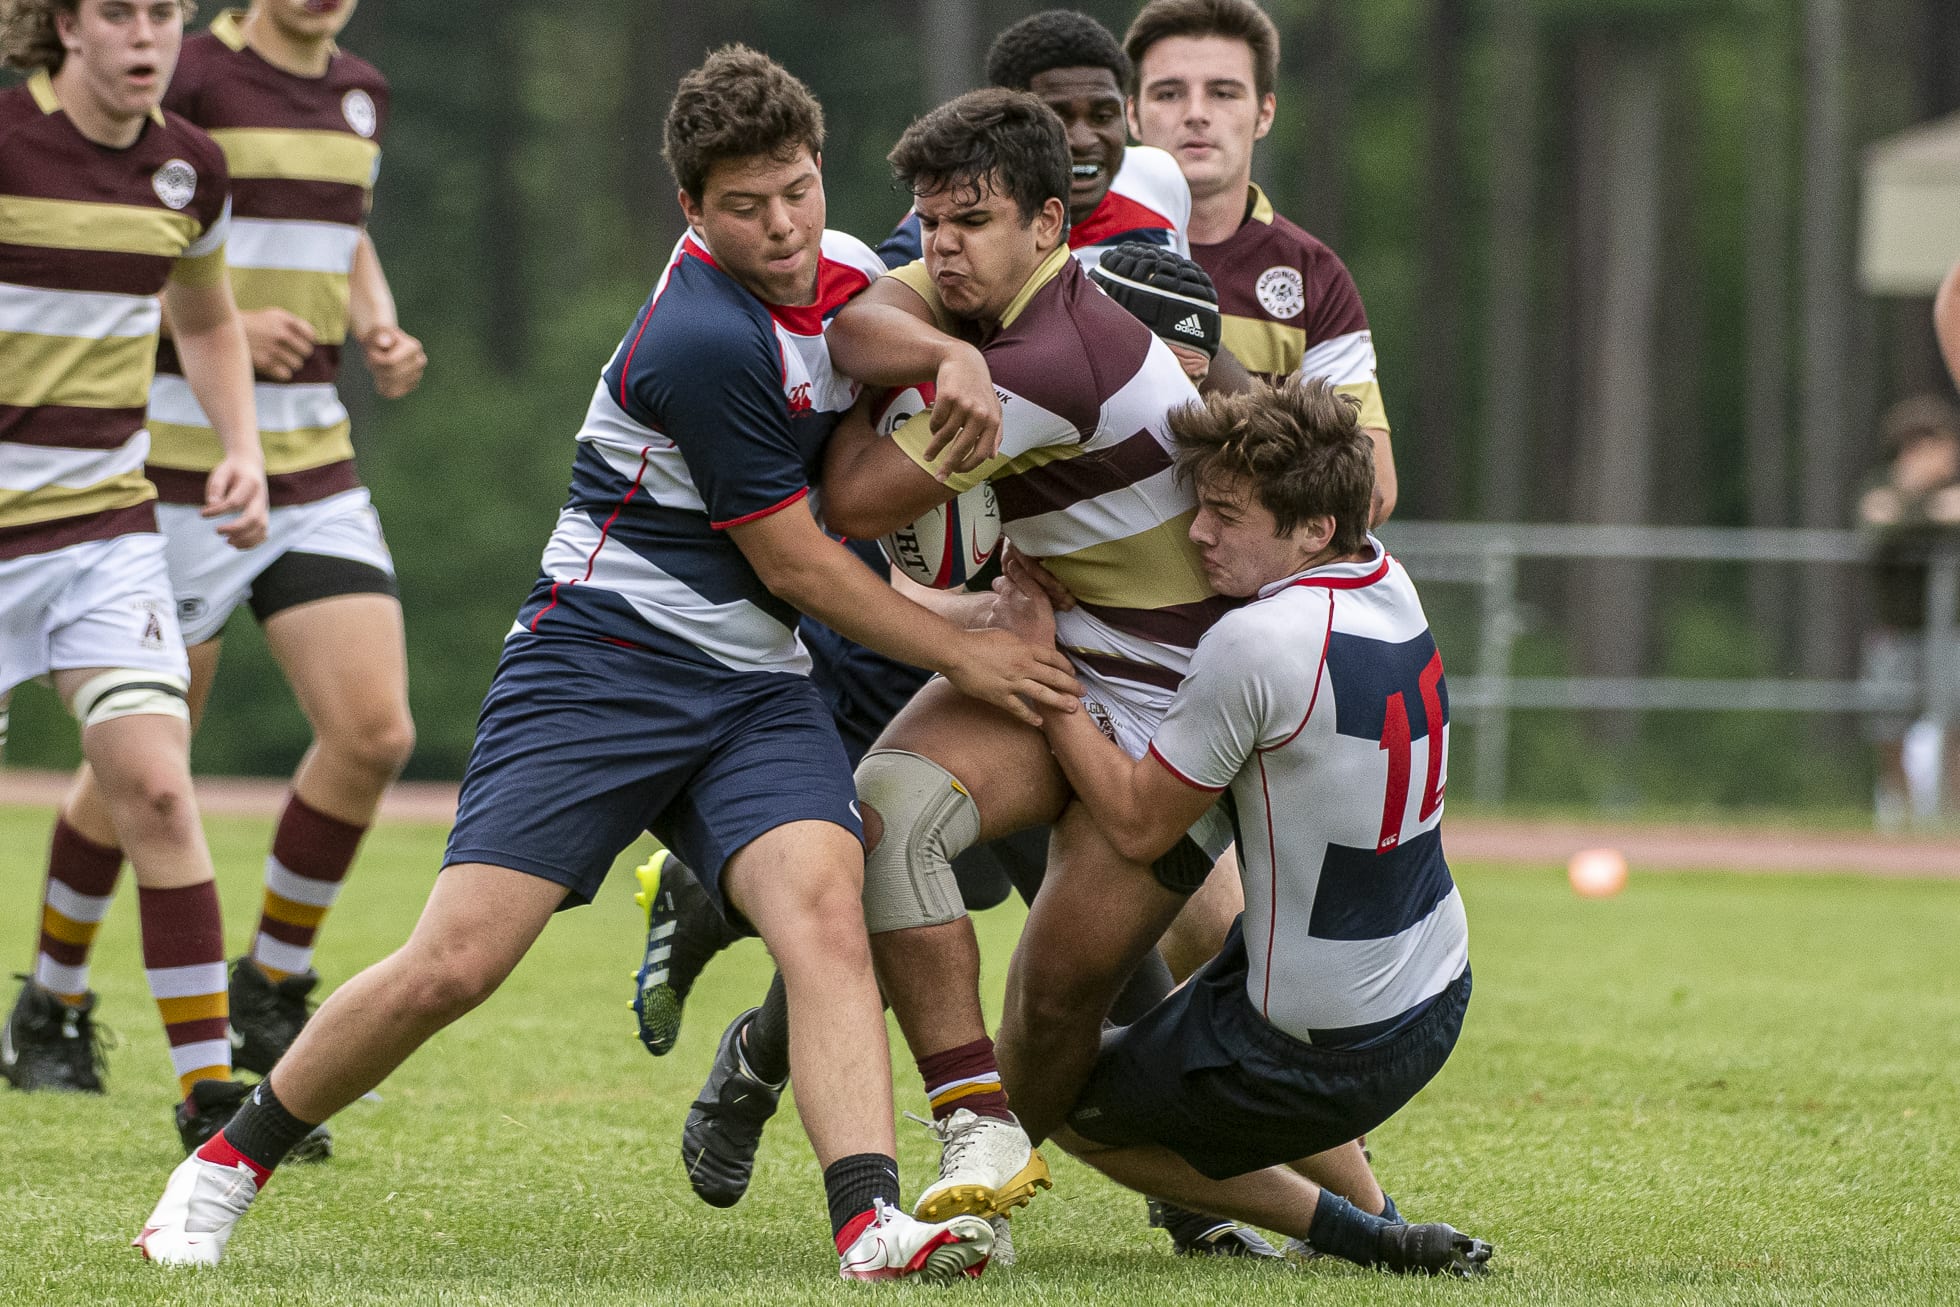 Algonquin rugby wins state championship